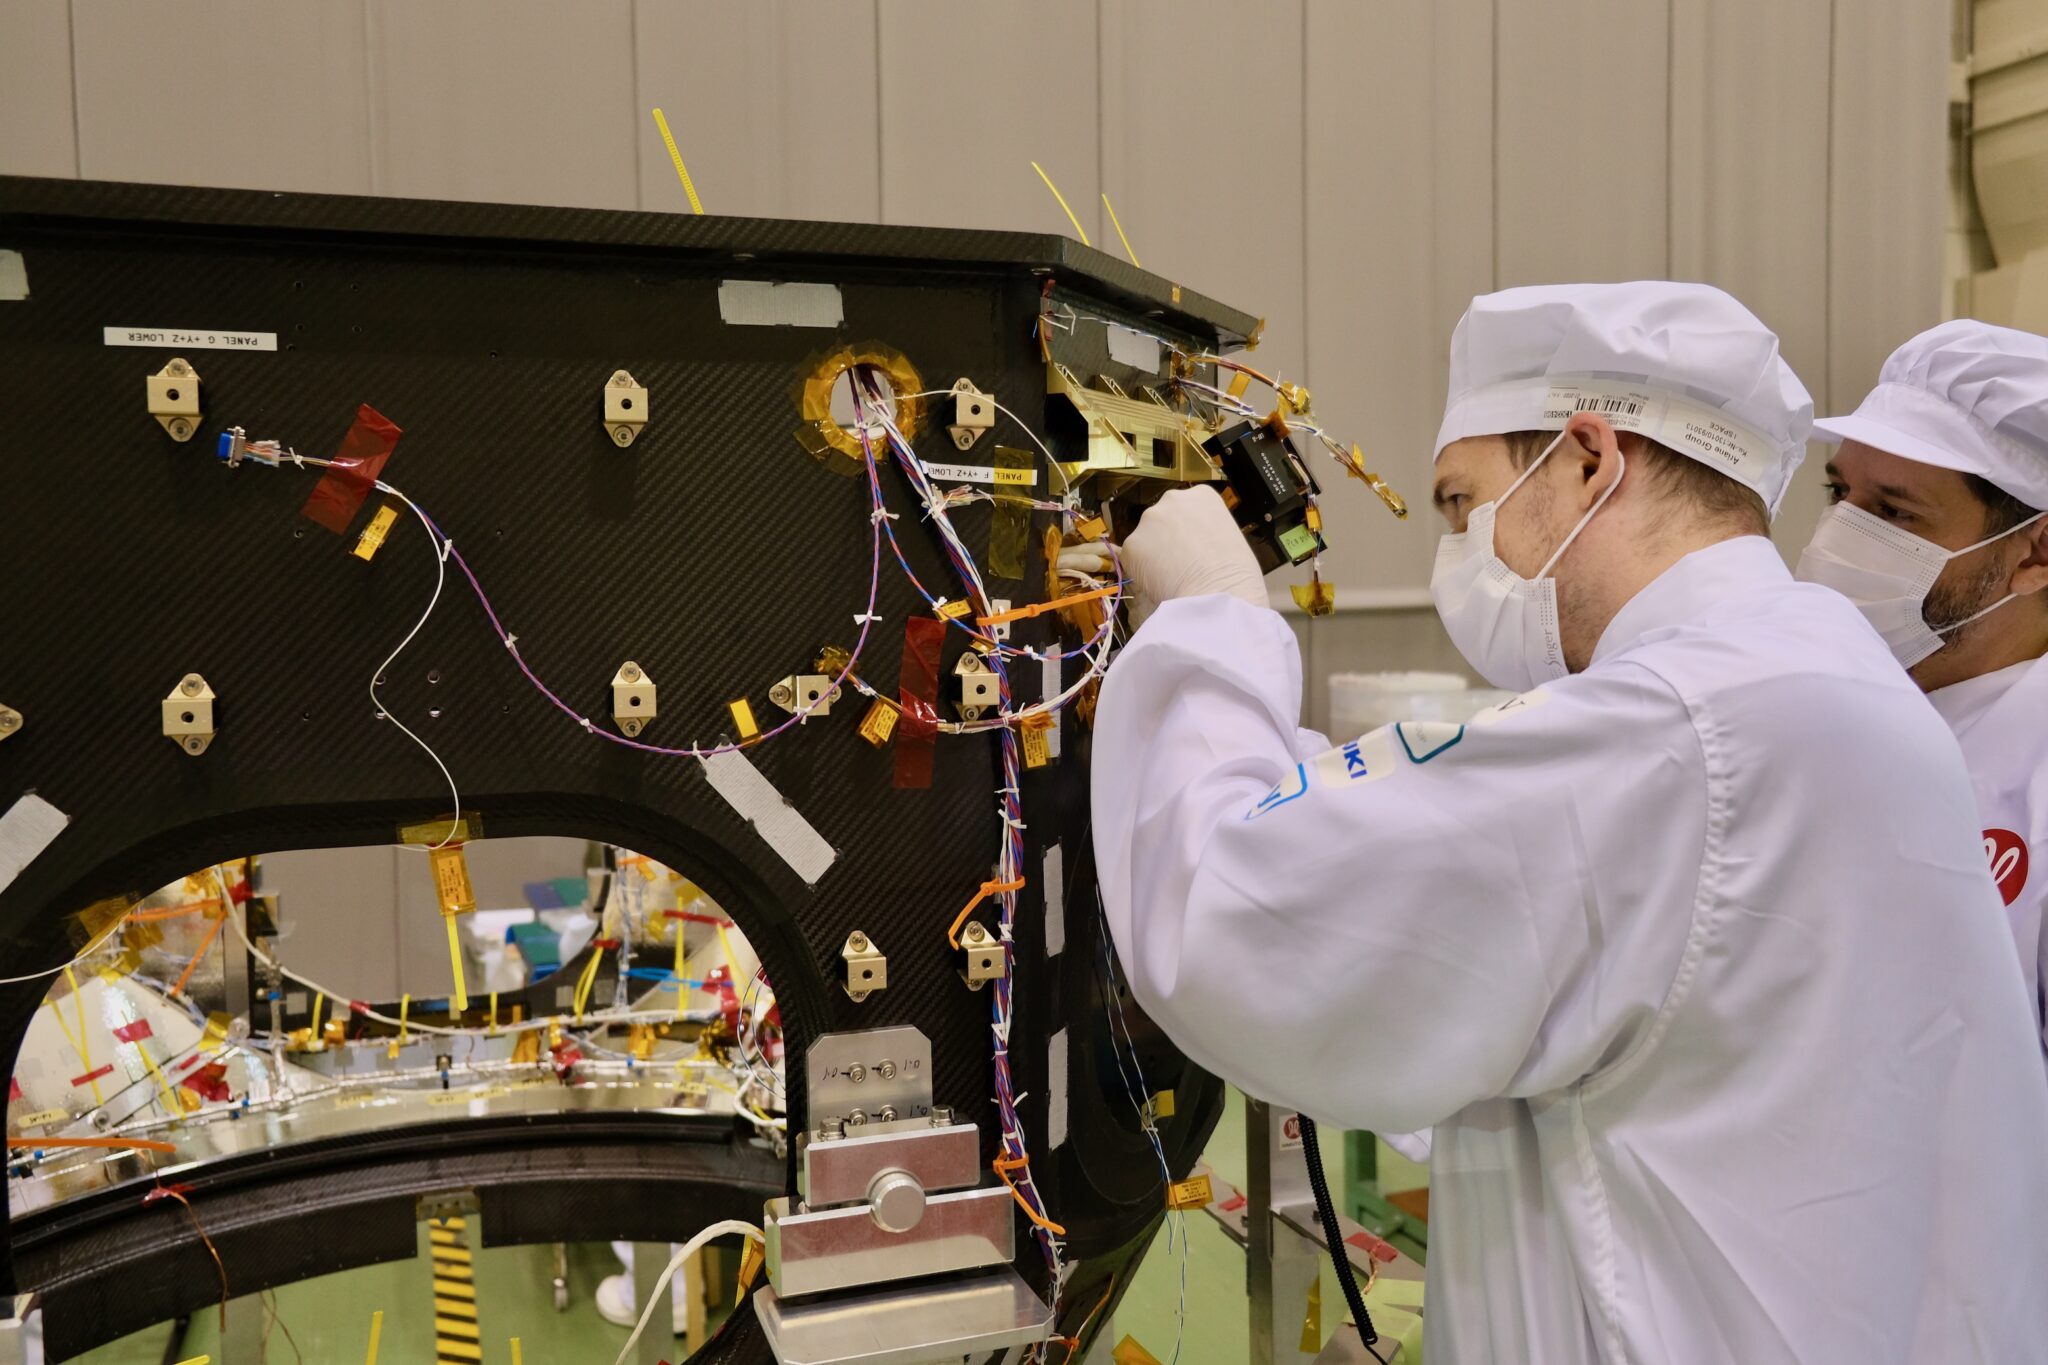 Japanese Company ispace Readies for Lunar Communications System as Part of NASA’s CLPS Mission